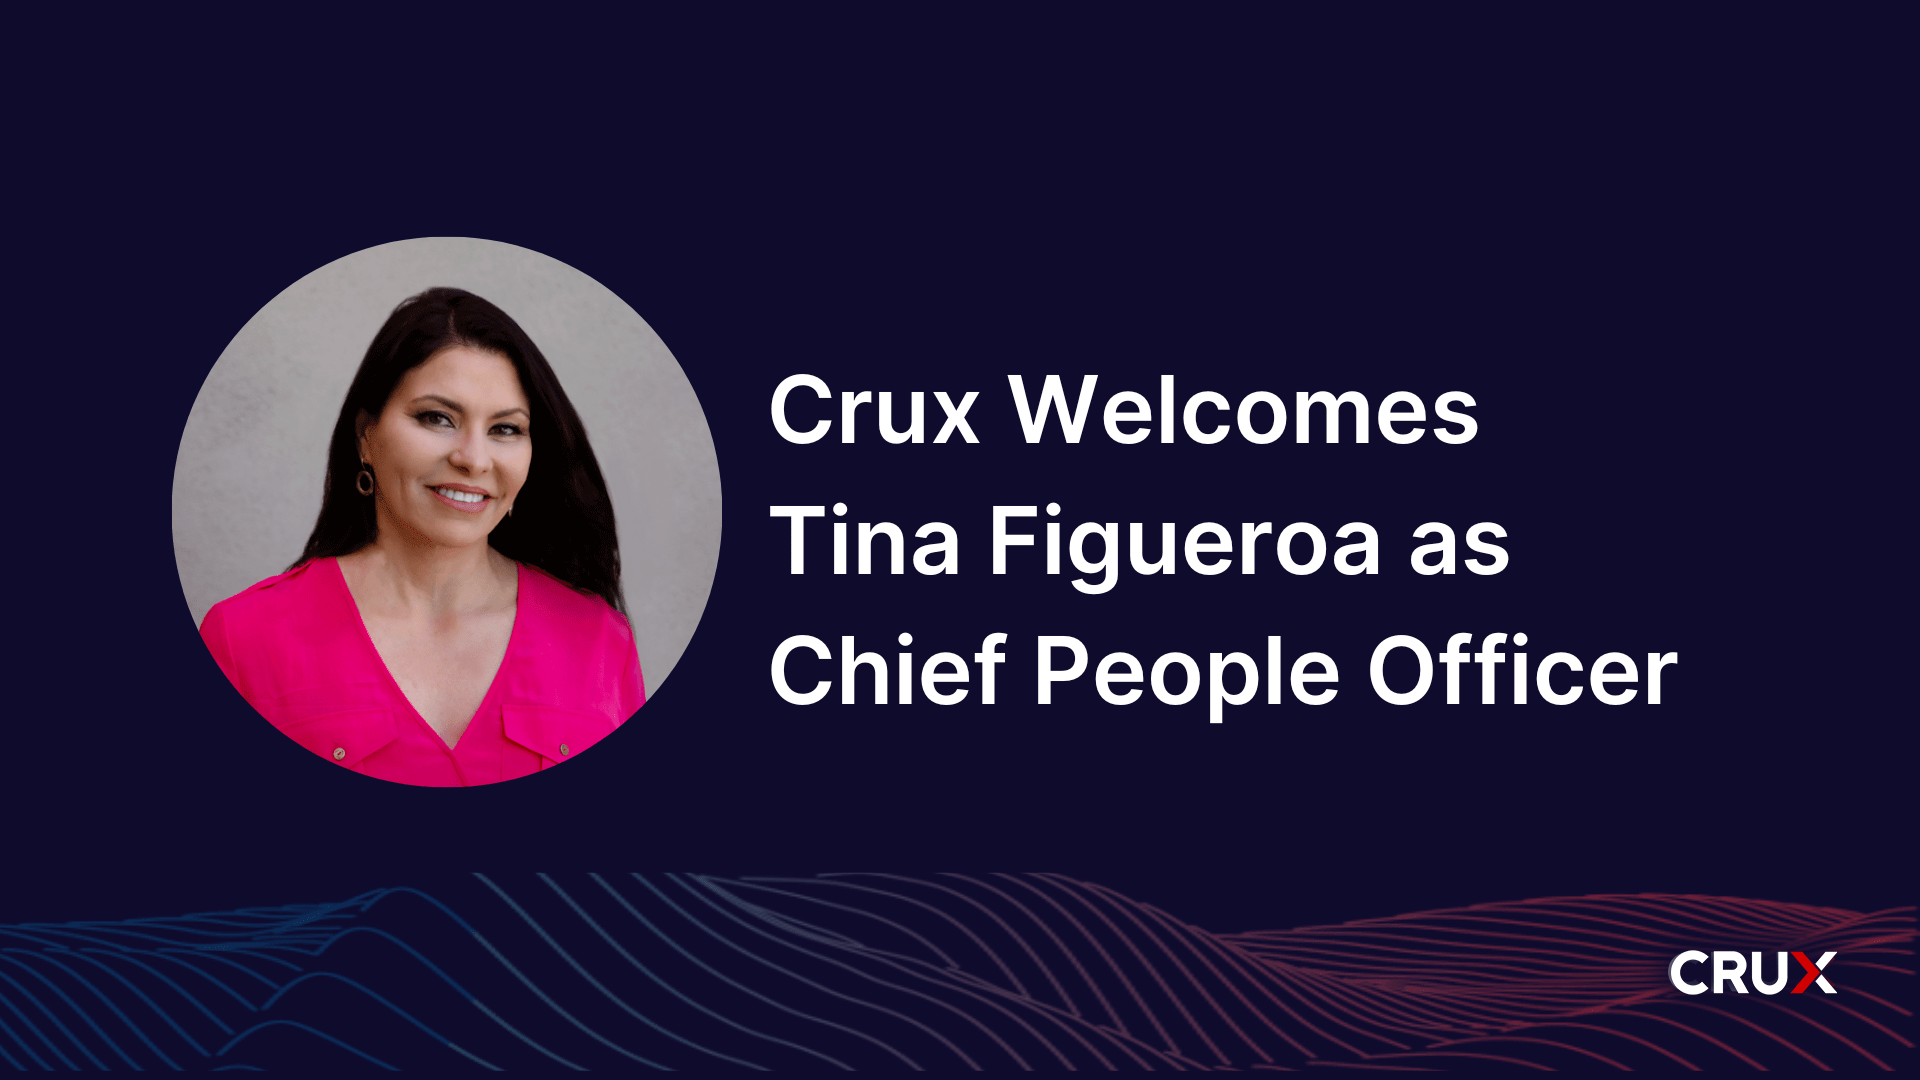 Crux is Pleased to Welcome Tina Figueroa as our First Chief People Officer